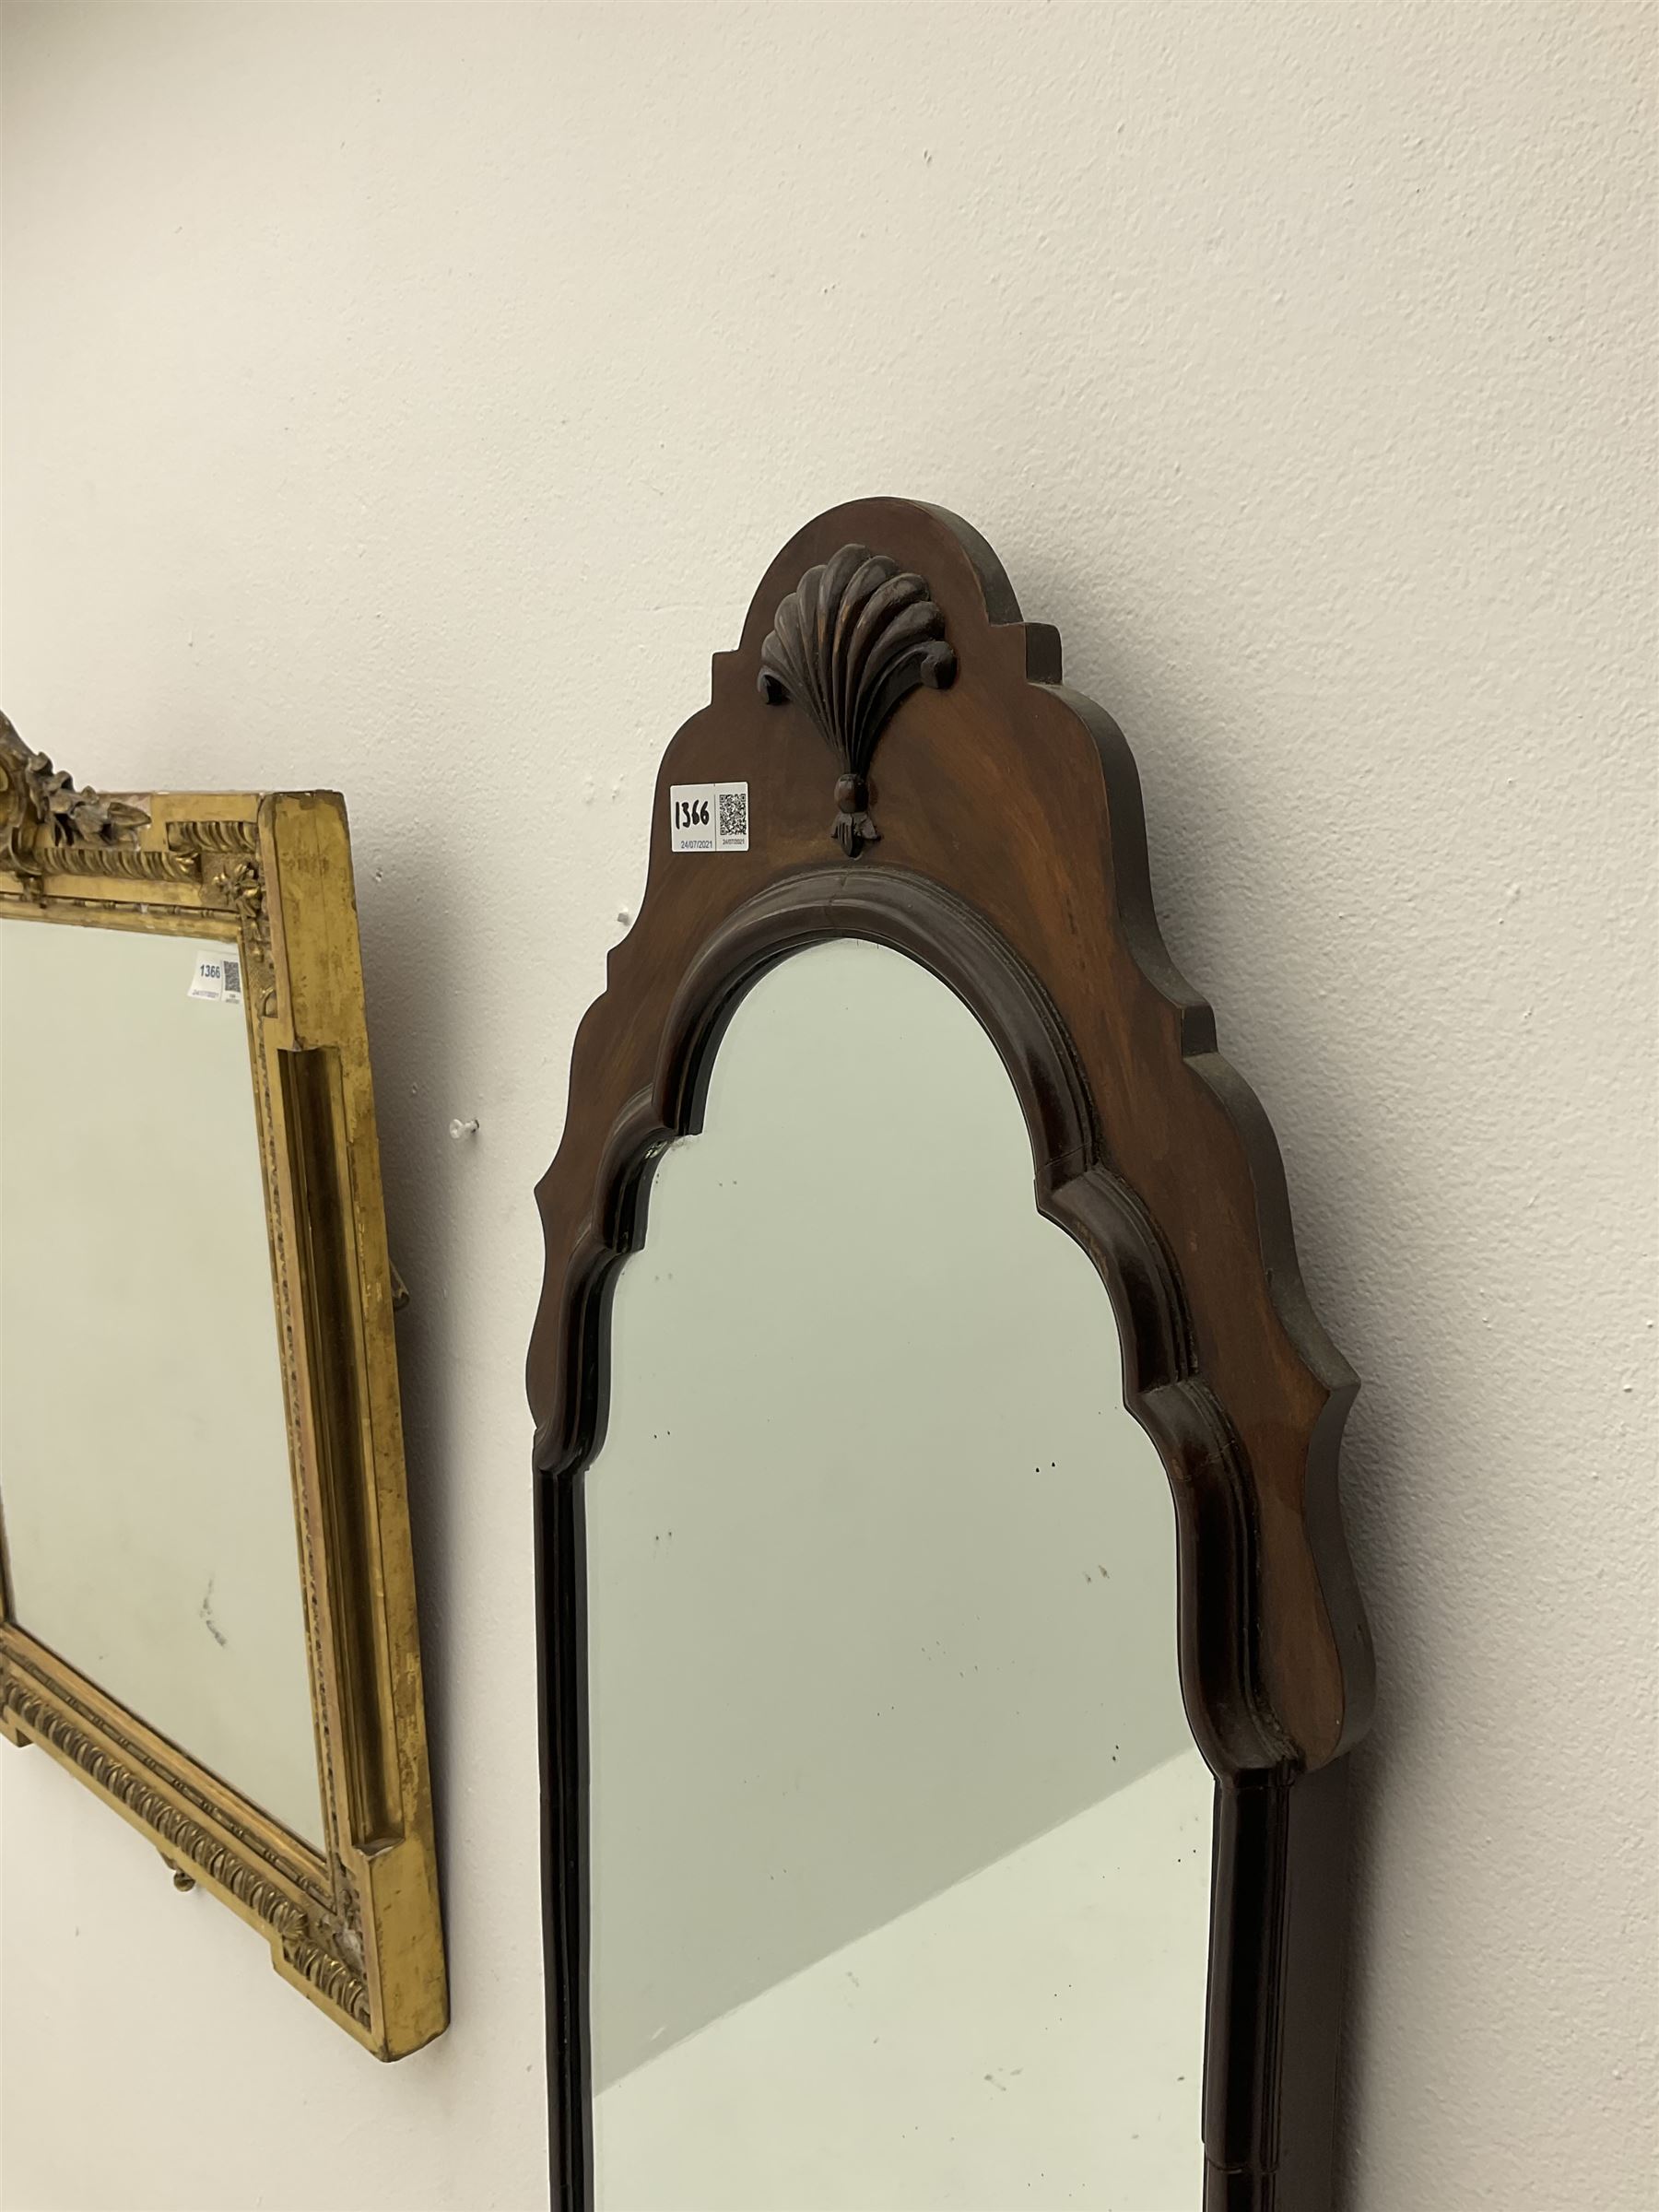 Small guilt framed mirror together with mahogany framed mirror - Image 3 of 3